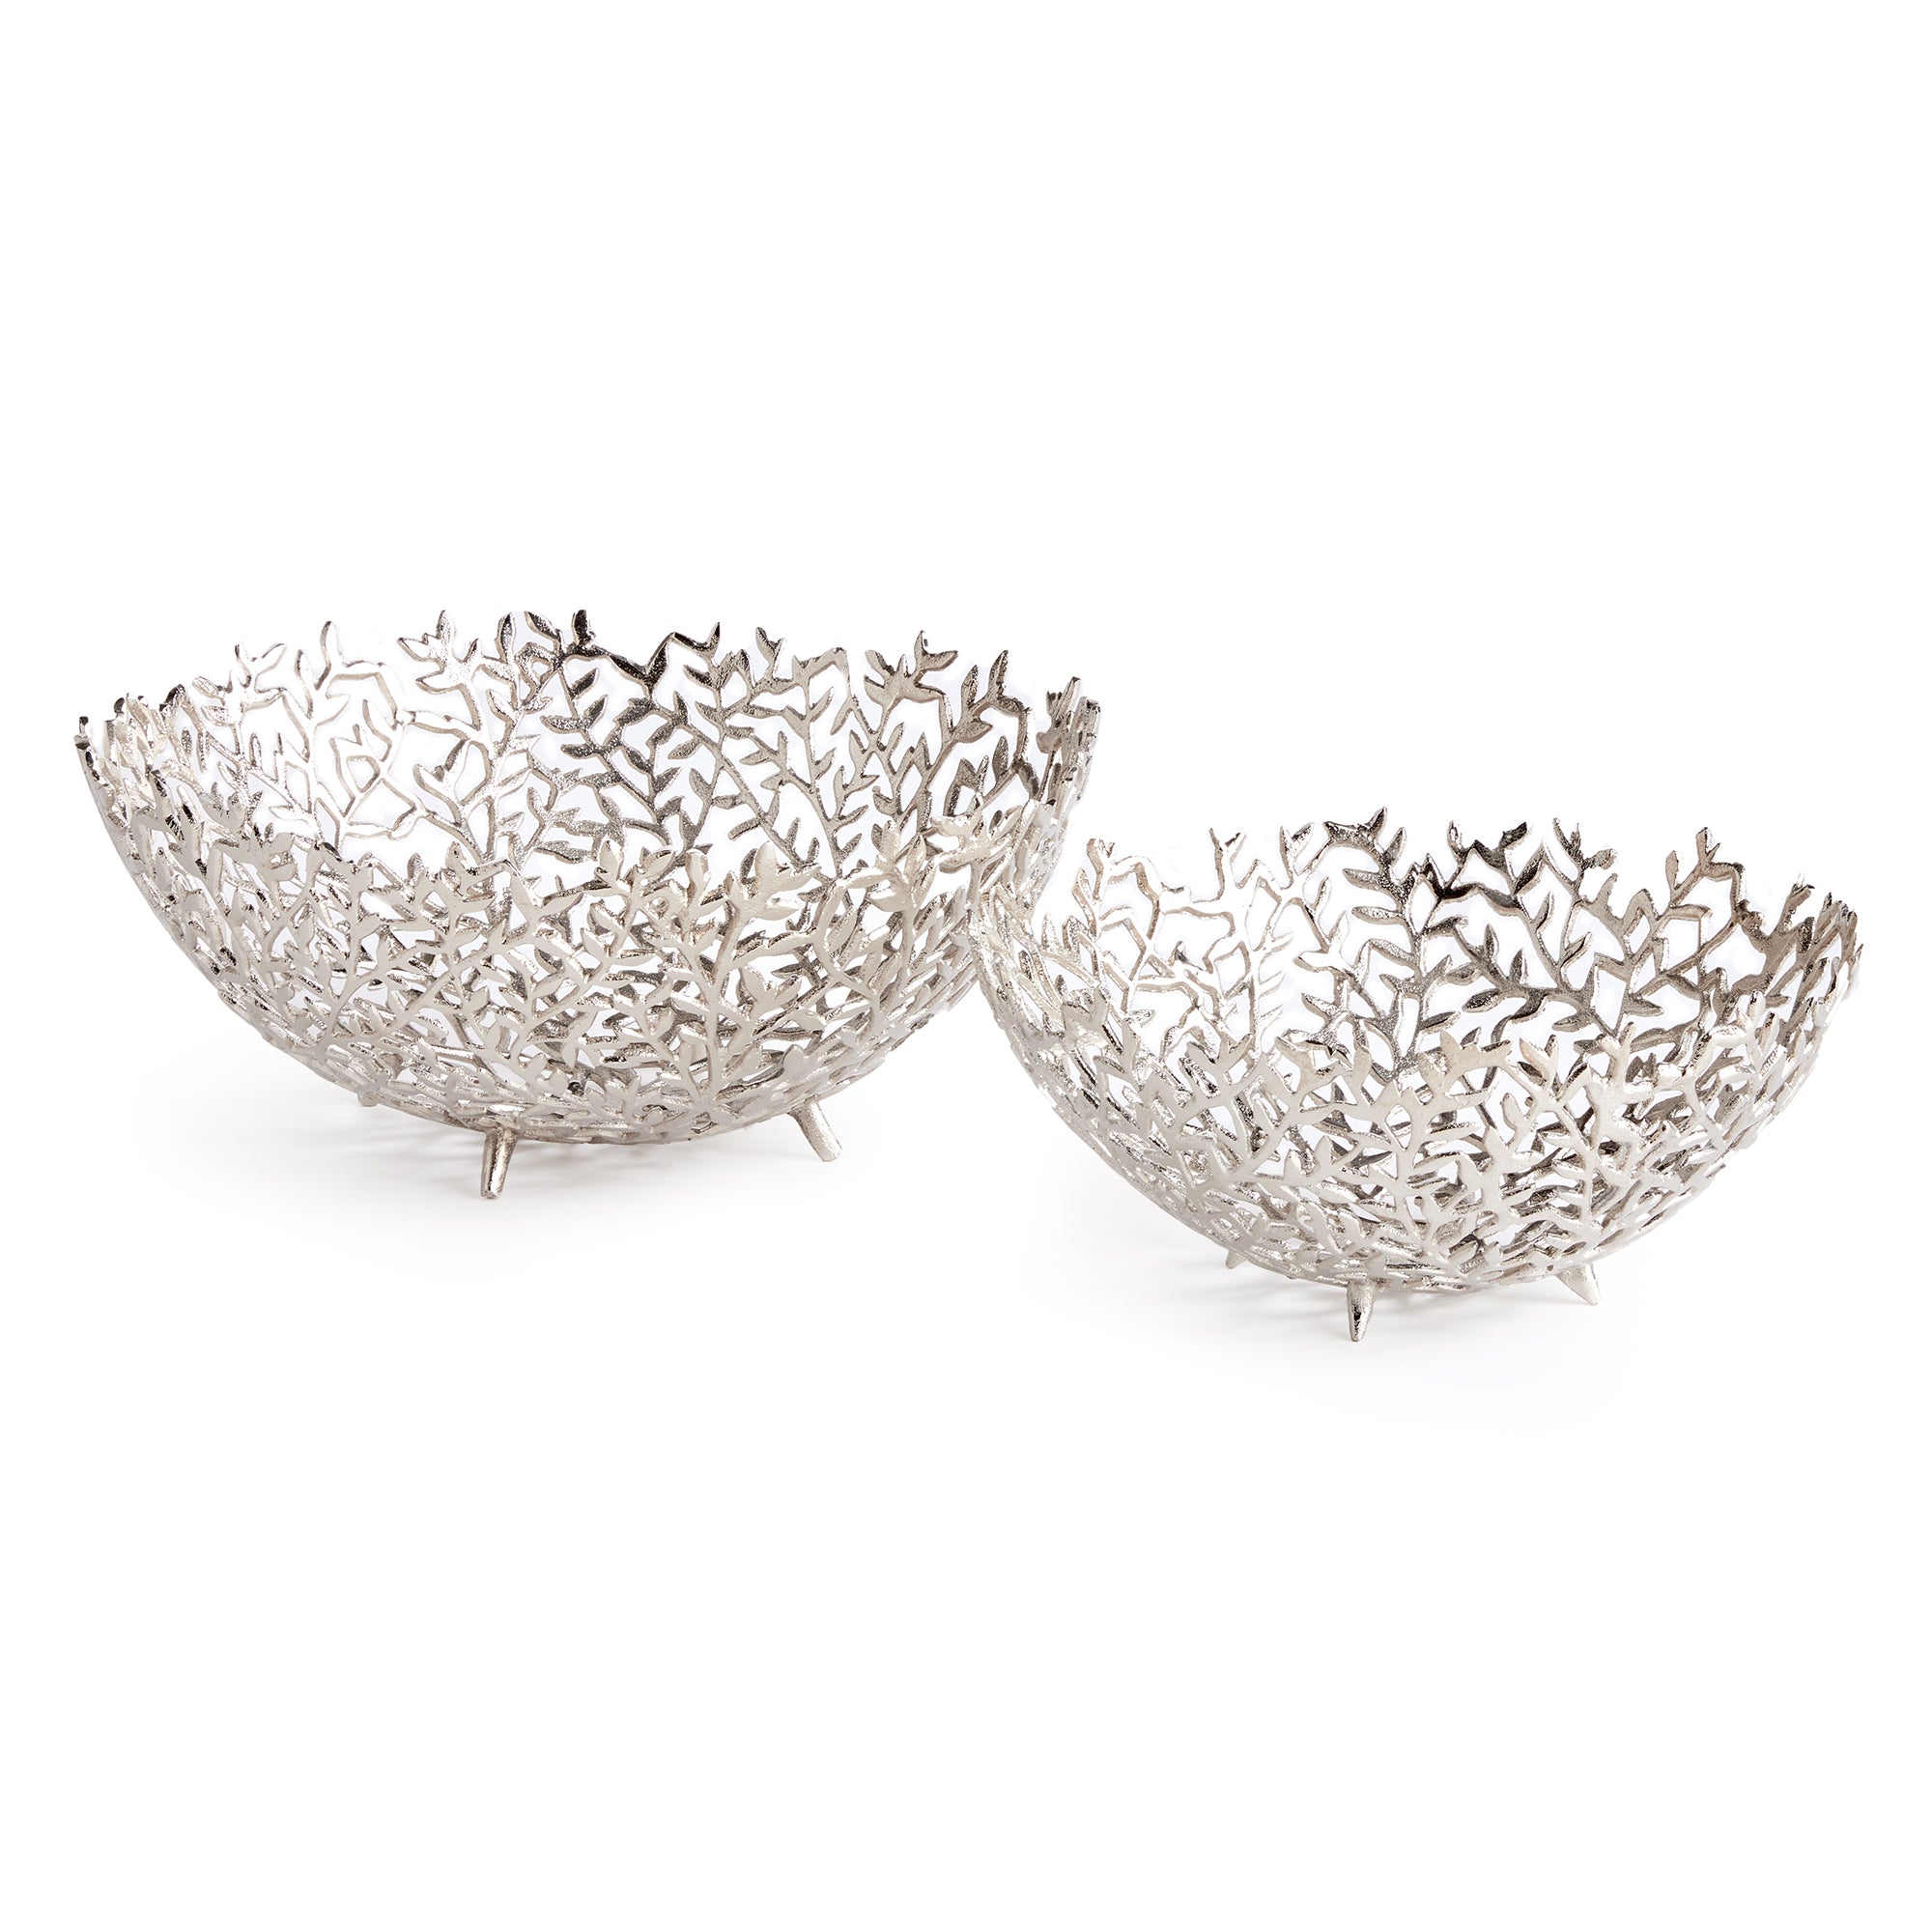 Light flowing vines make up the composition of this pair of silver decorative bowls. Fill with natural green orbs, or display as is for a clean, sophisticated look. Amethyst Home provides interior design, new construction, custom furniture, and area rugs in the Boston metro area.